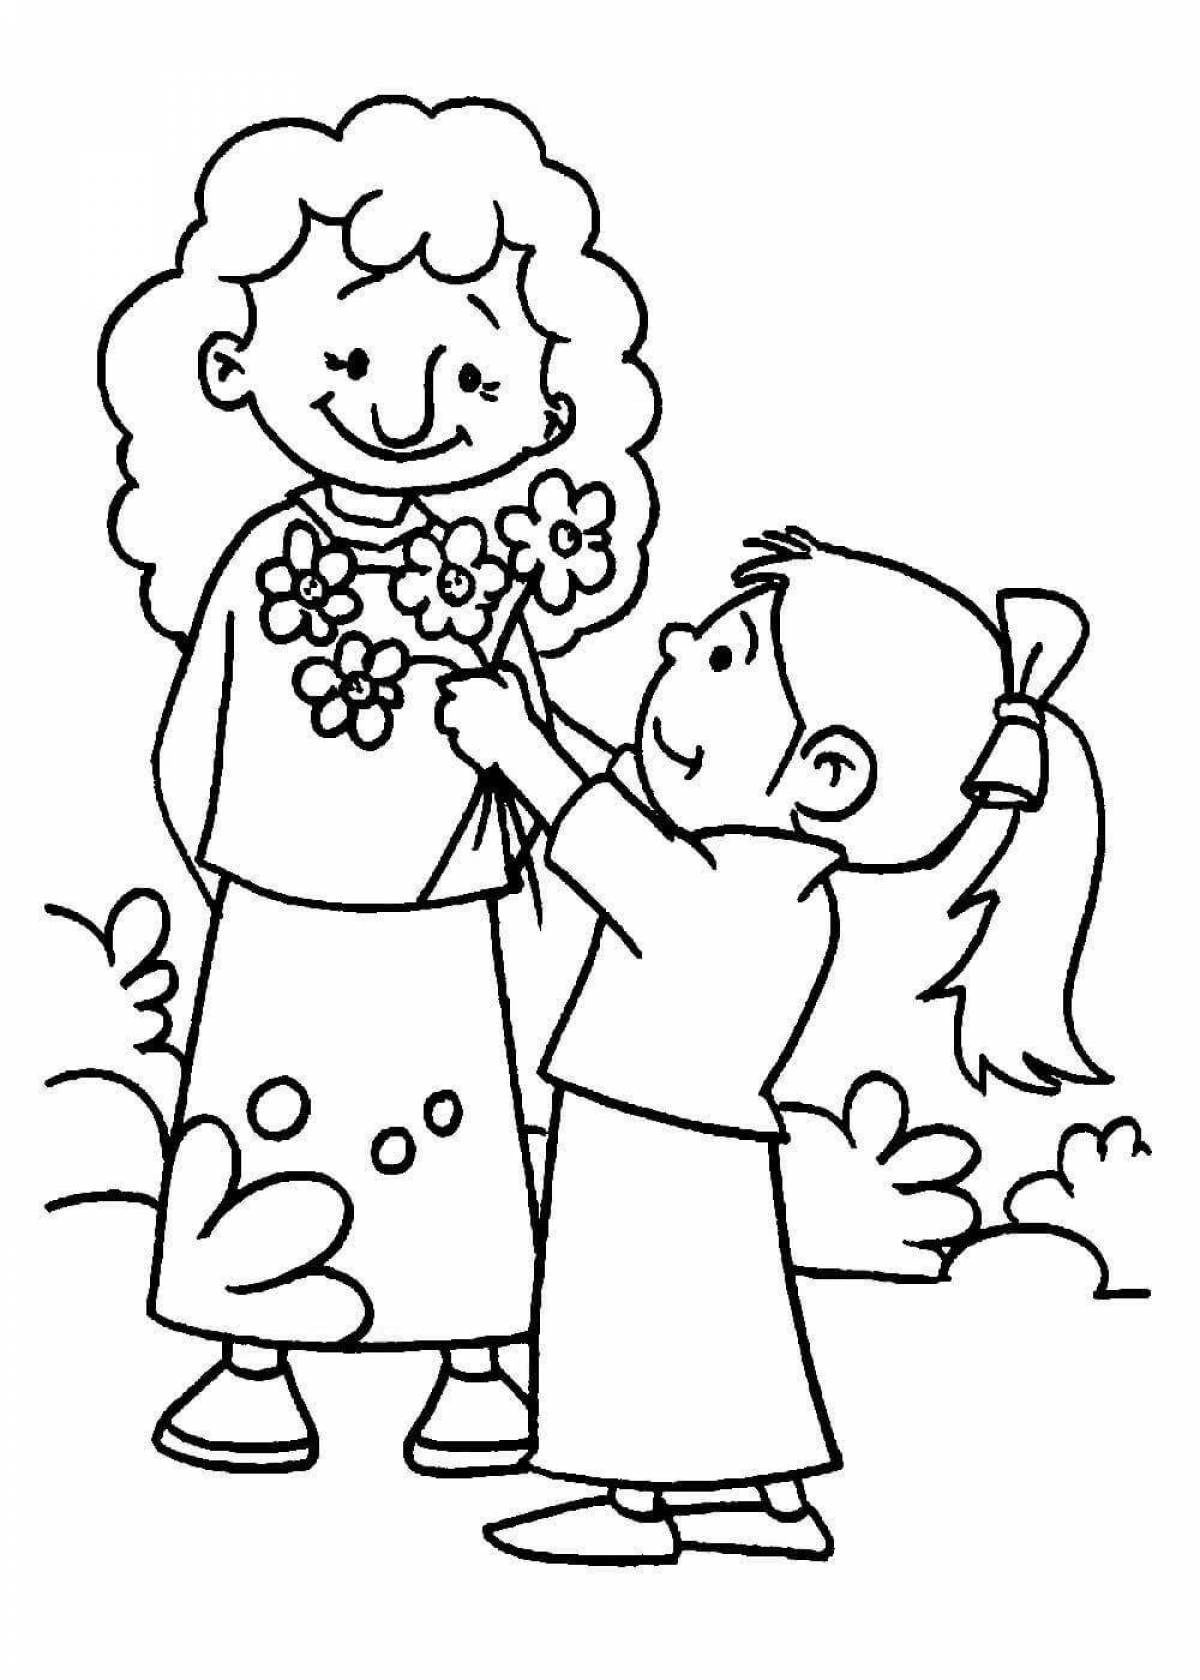 A wonderful coloring book for mom on mother's day